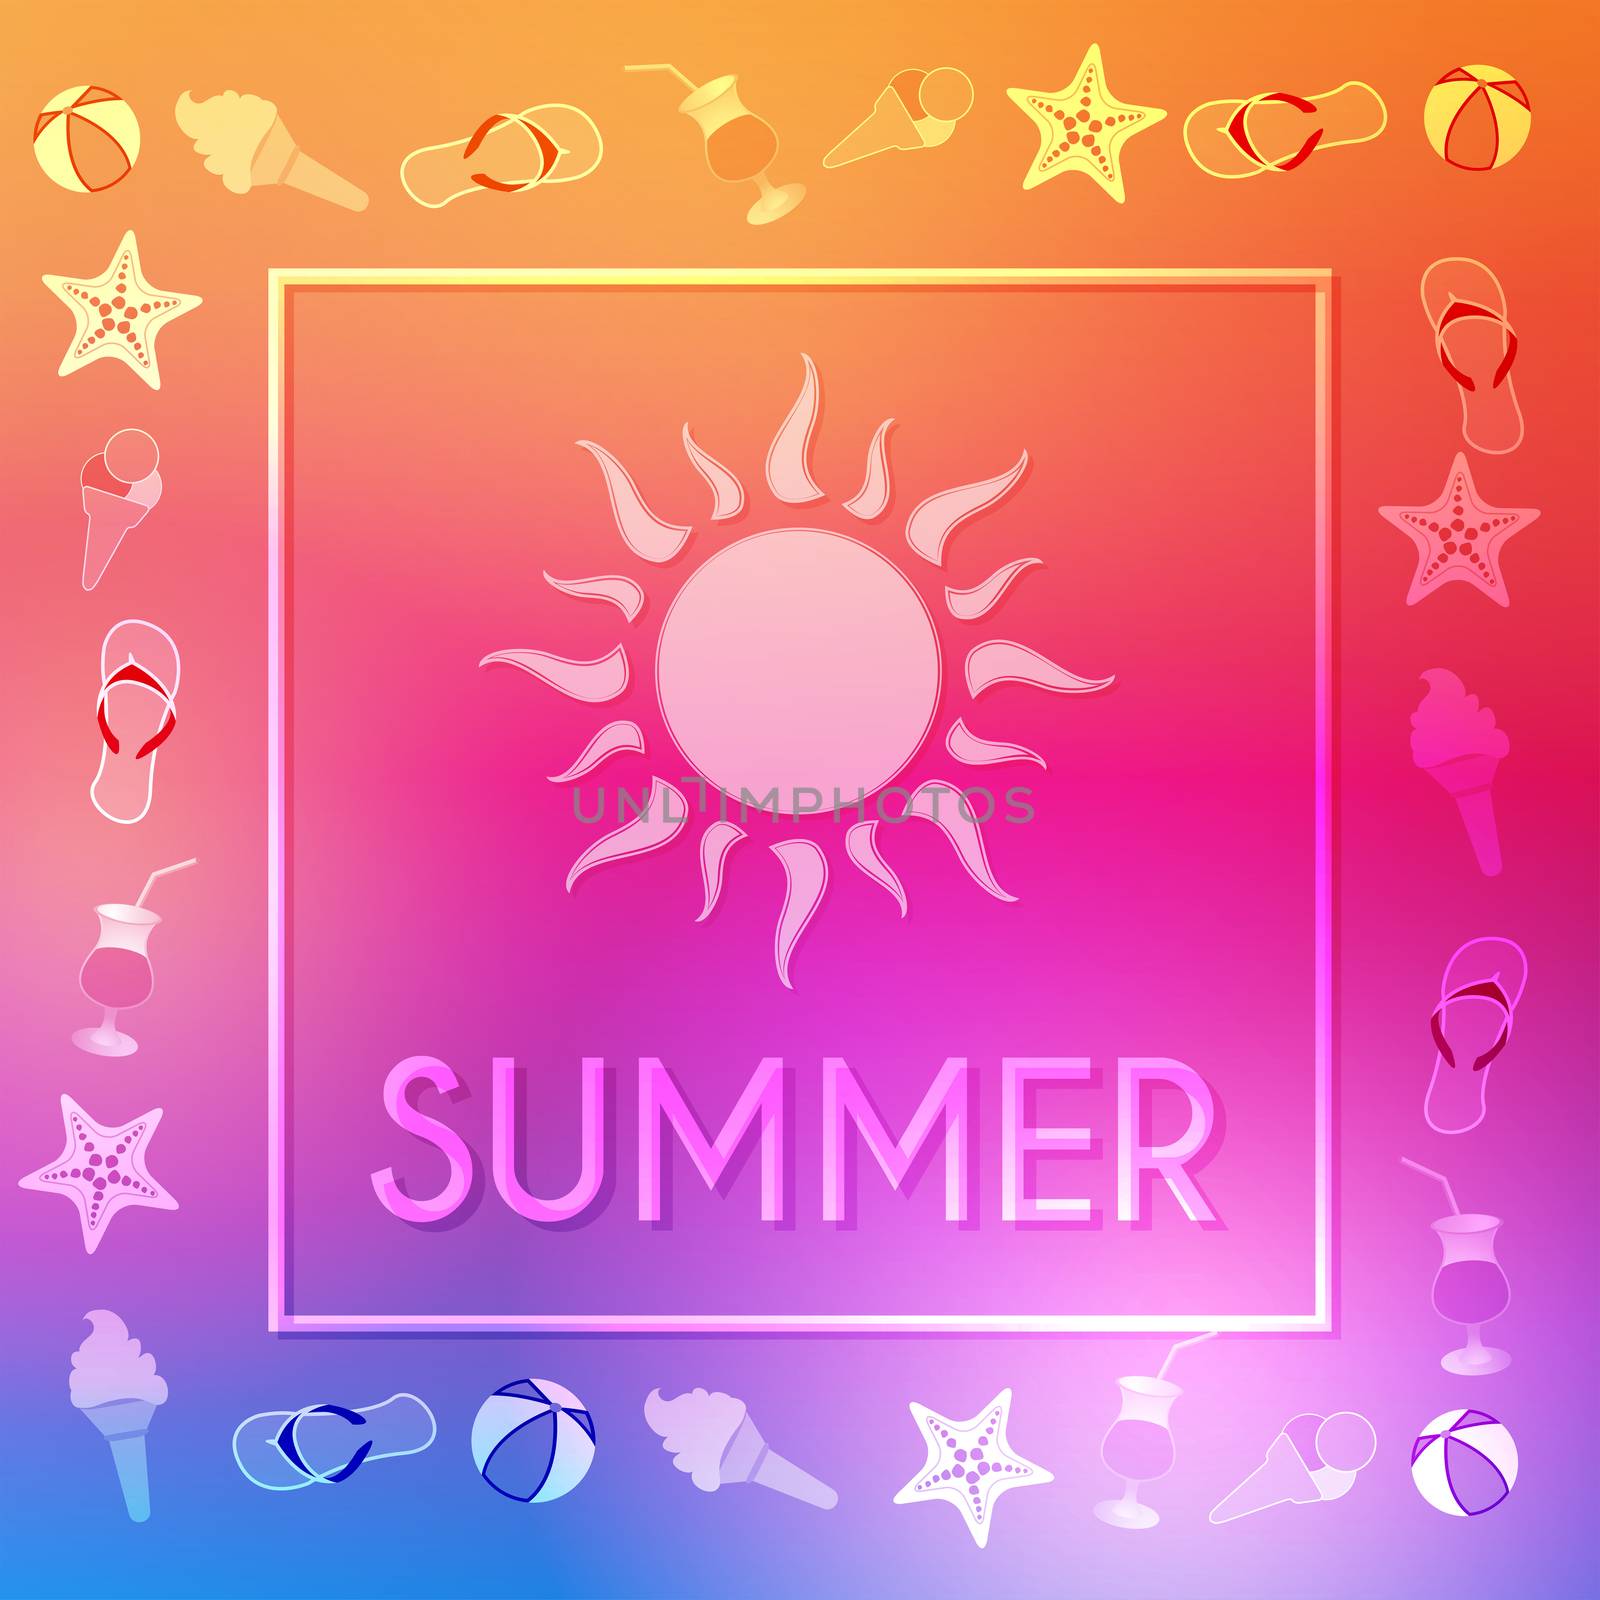 text summer with sun and summery symbols in frame over orange pink violet background, flat design poster